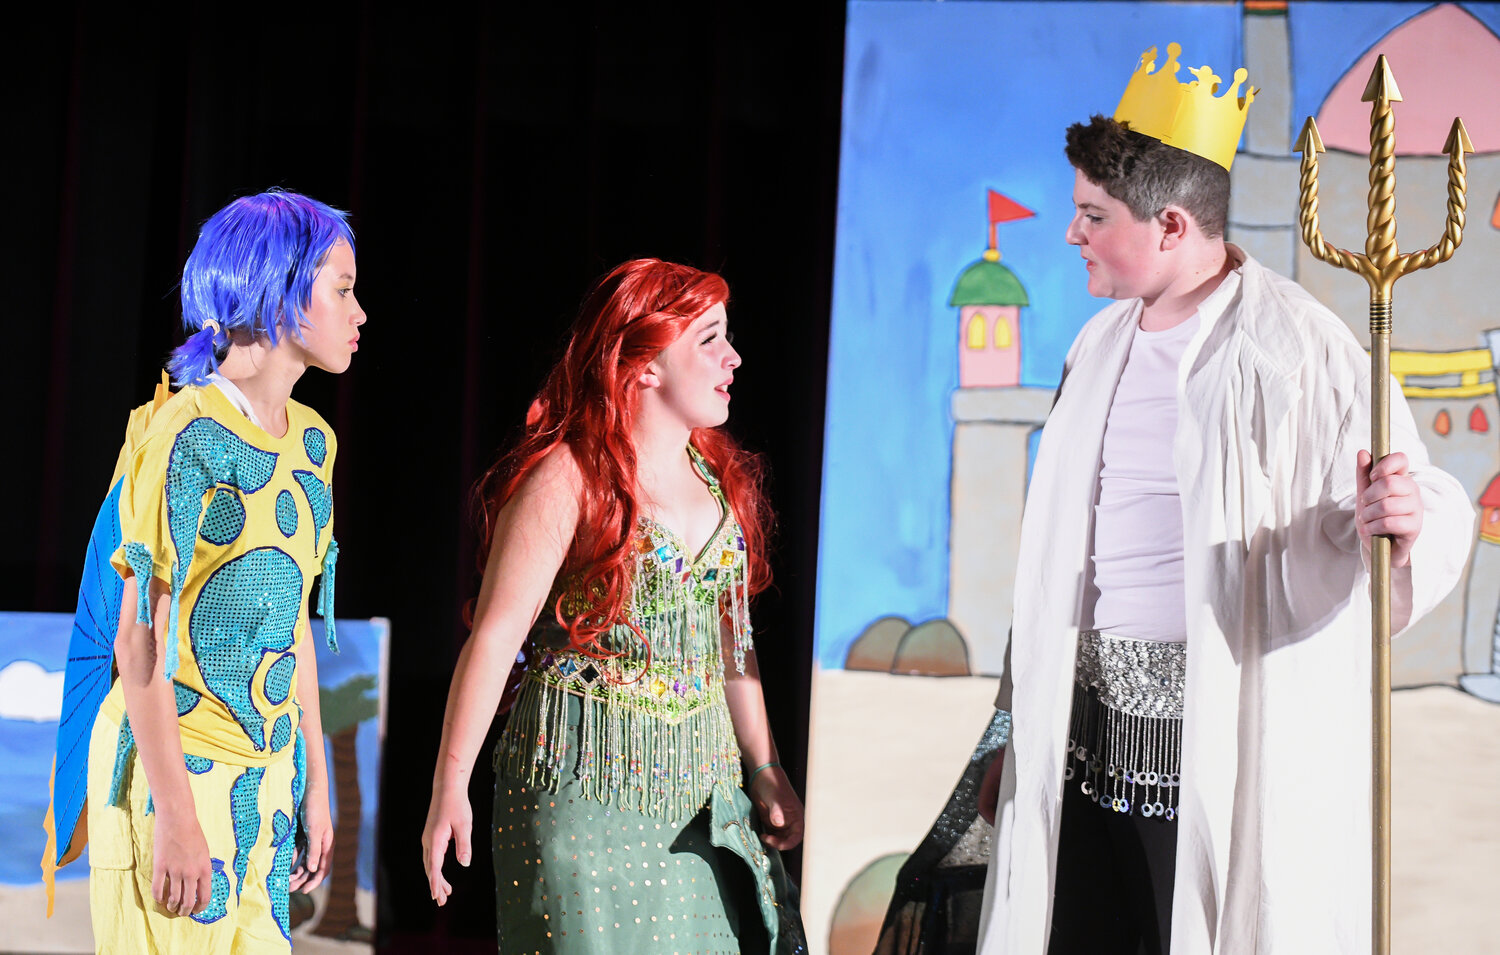 Players in the production of The Little Mermaid perform on stage as part of the Solebury StarCatchers Theater and Scenic Arts Camp Cathy Block, Rebecca Wilschutz and Wendy Erholm co-direct the camp.